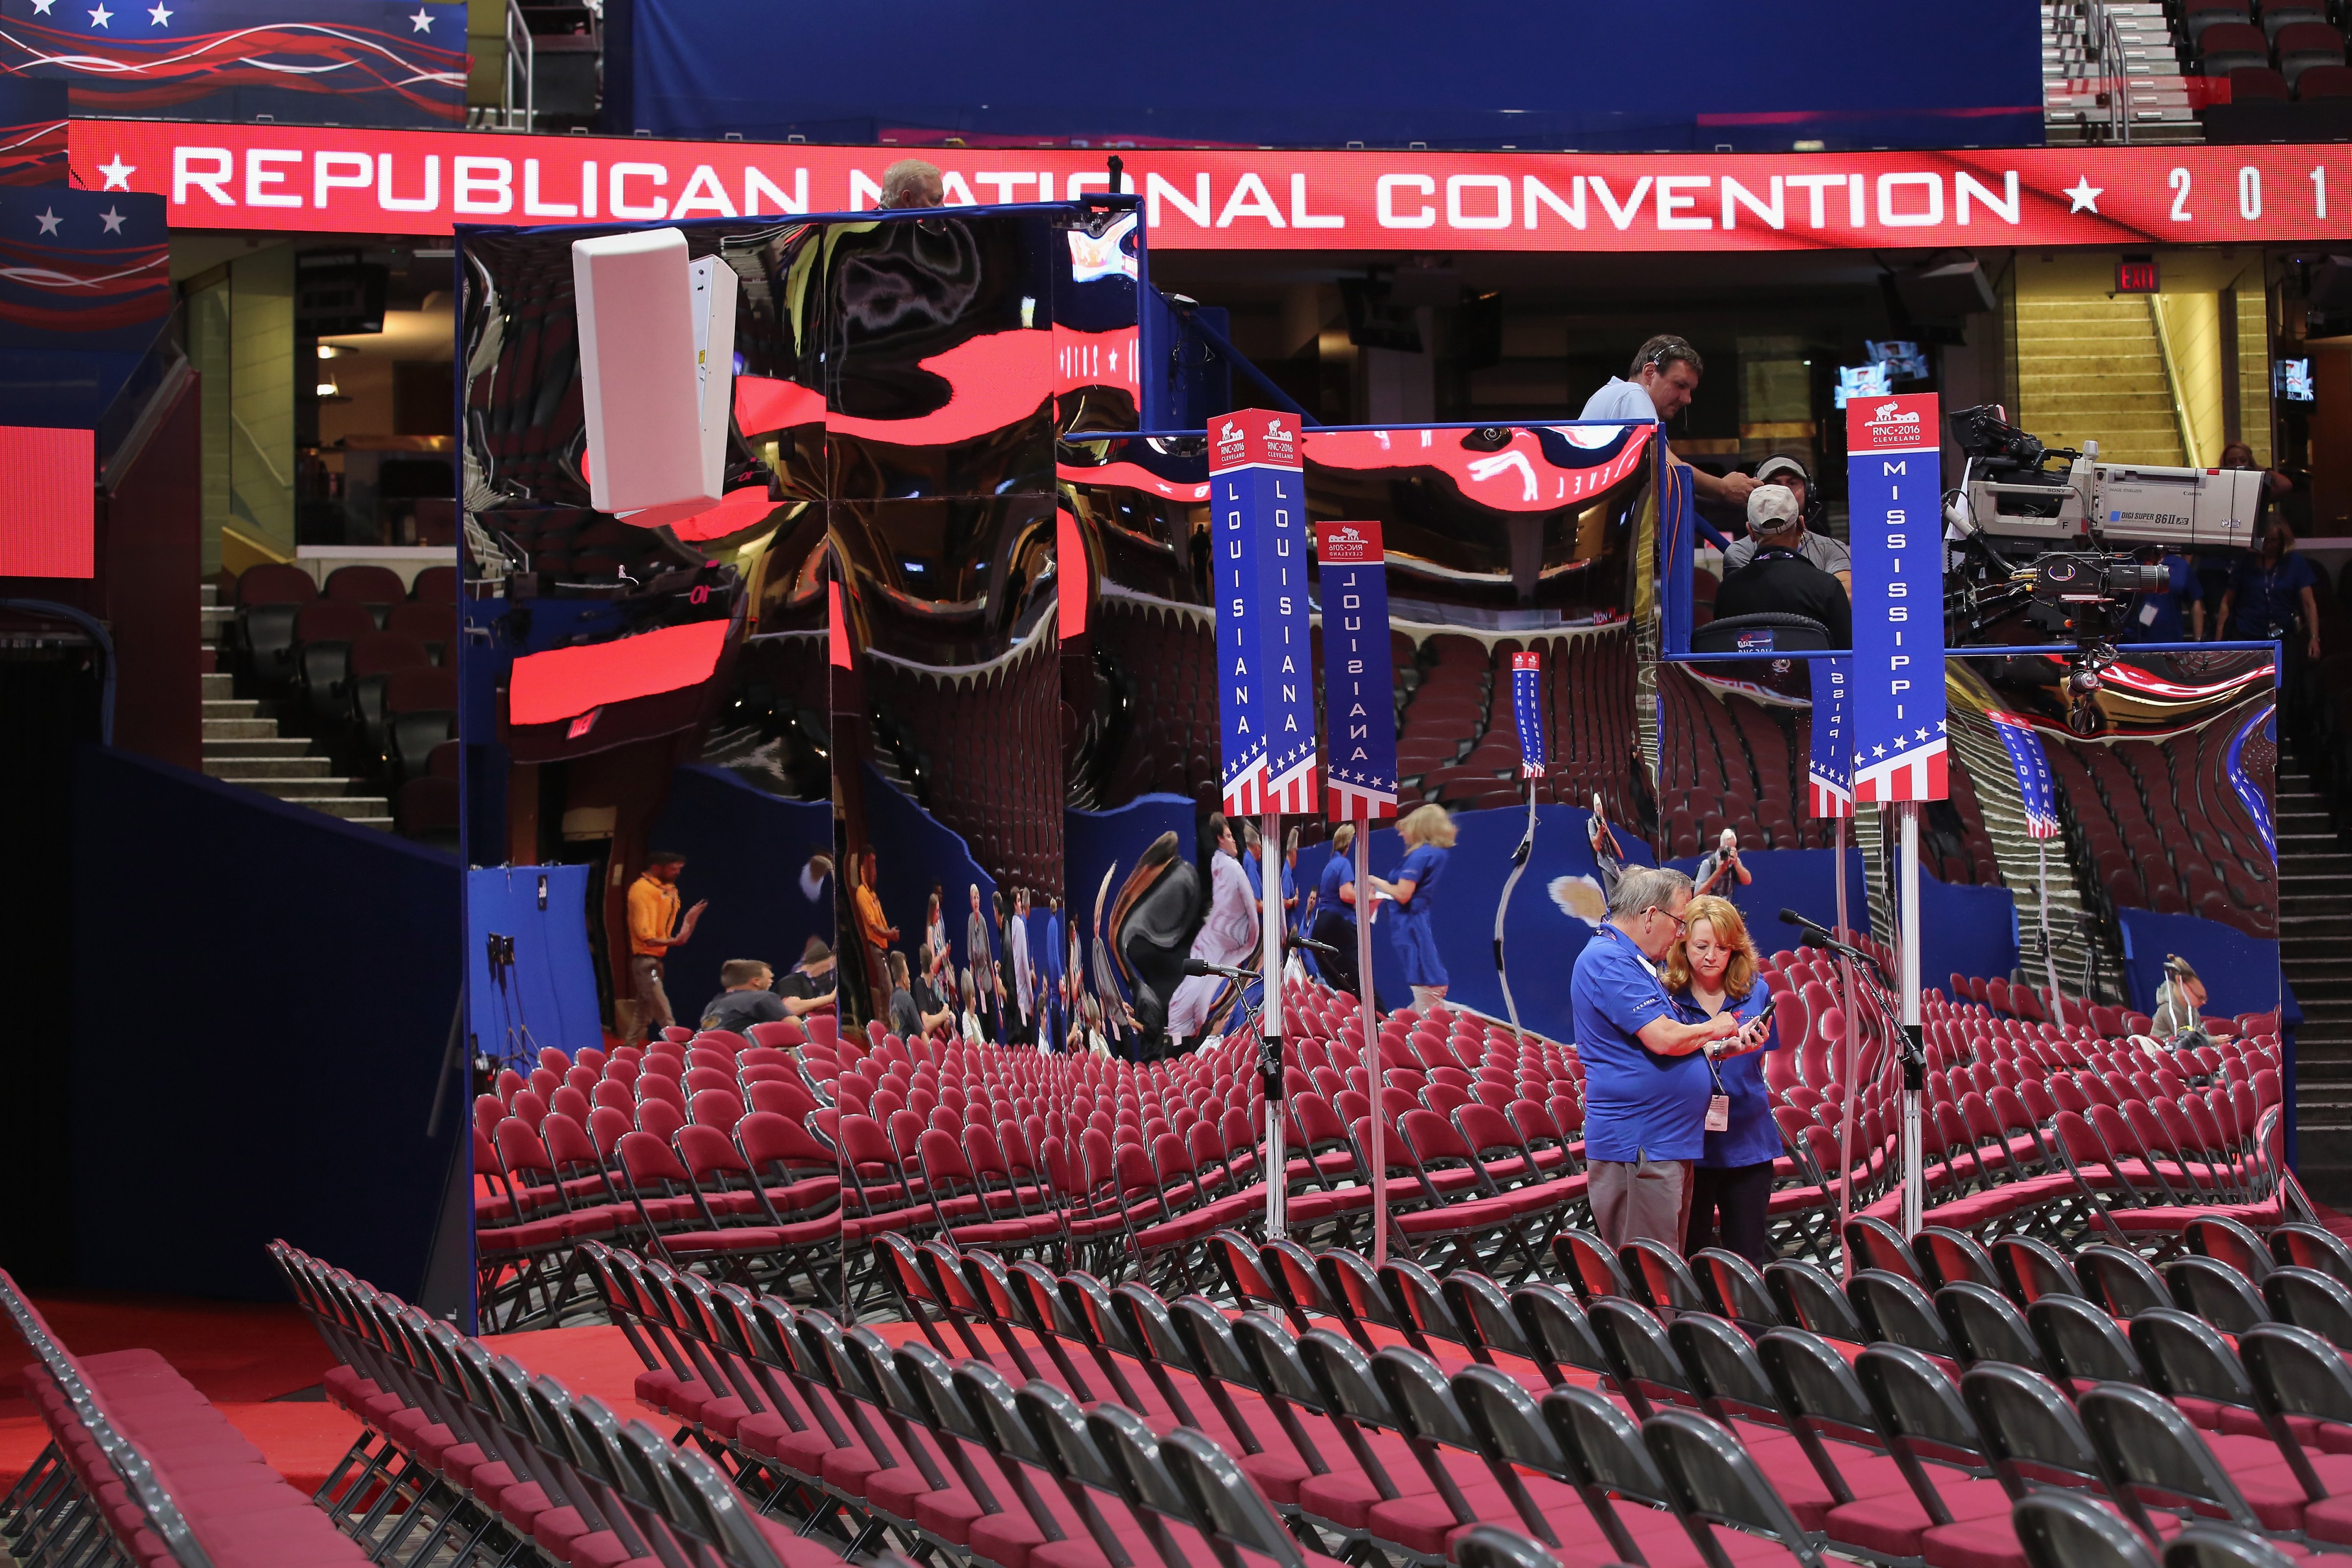 vent workers compare photos on the floor of the Quicken Loans Arena ahead of the Republican National Convention on July 16, 2016 in Cleveland, Ohio. (John Moore—Getty Images)